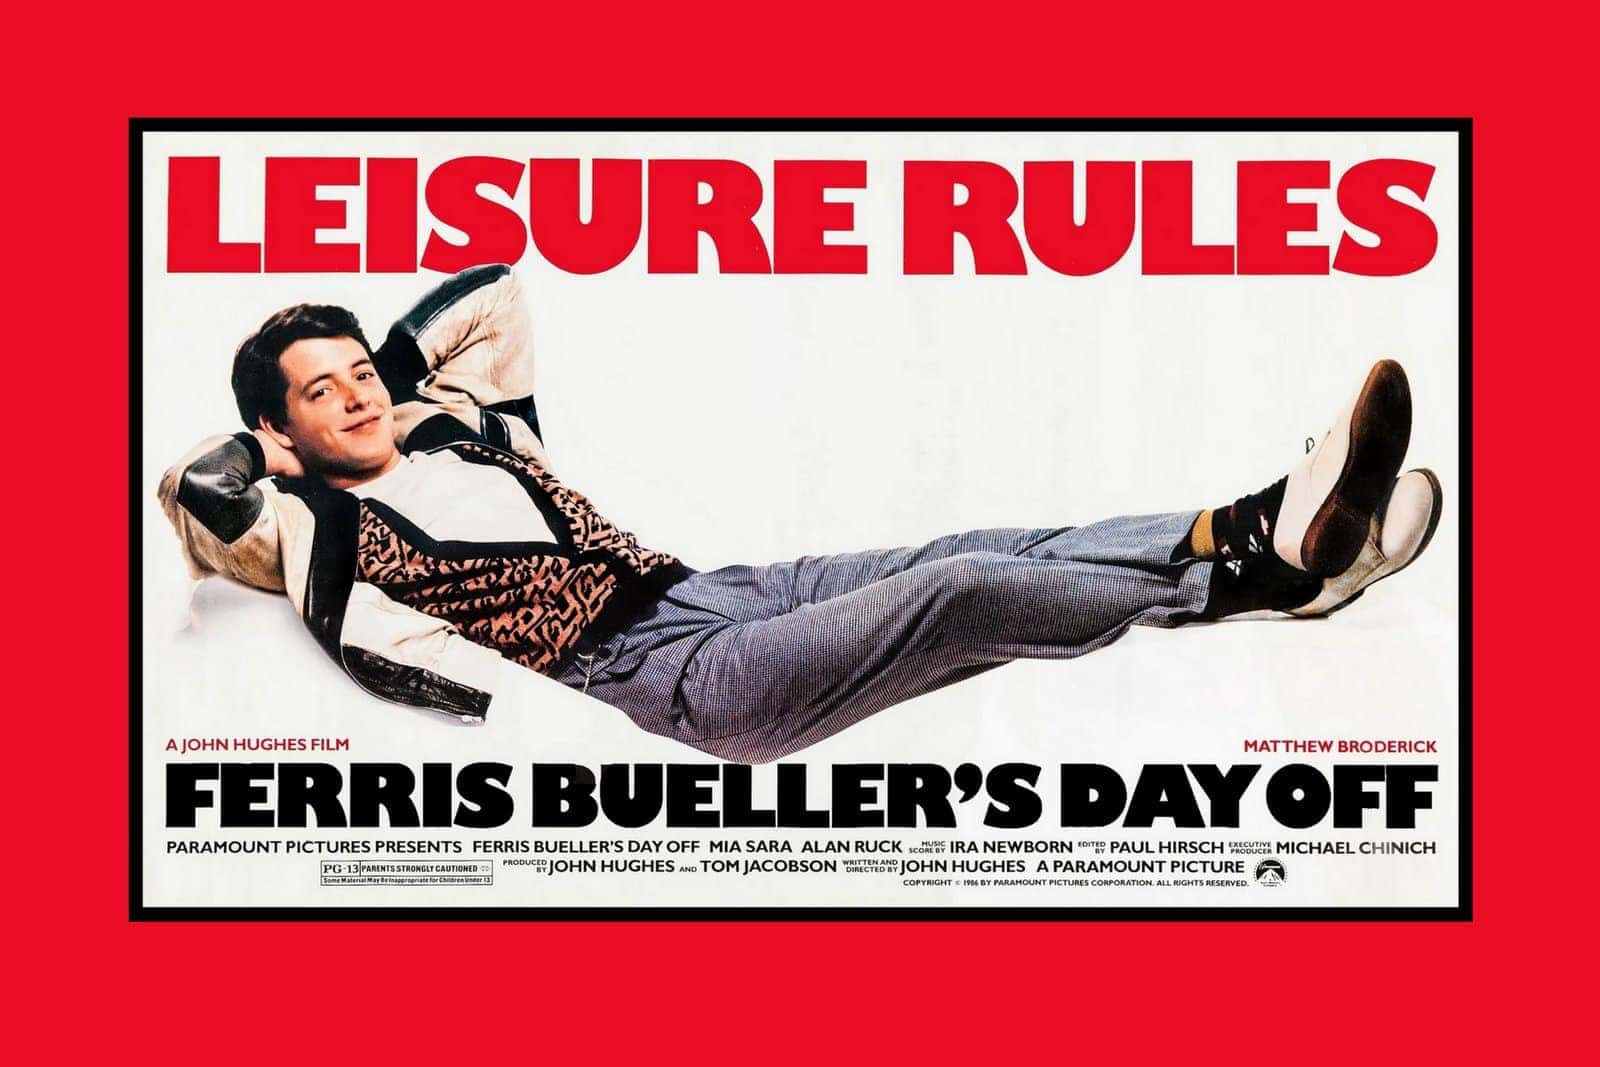 Ferris Bueller's Day Off': Fun Facts About the 1986 John Hughes Film